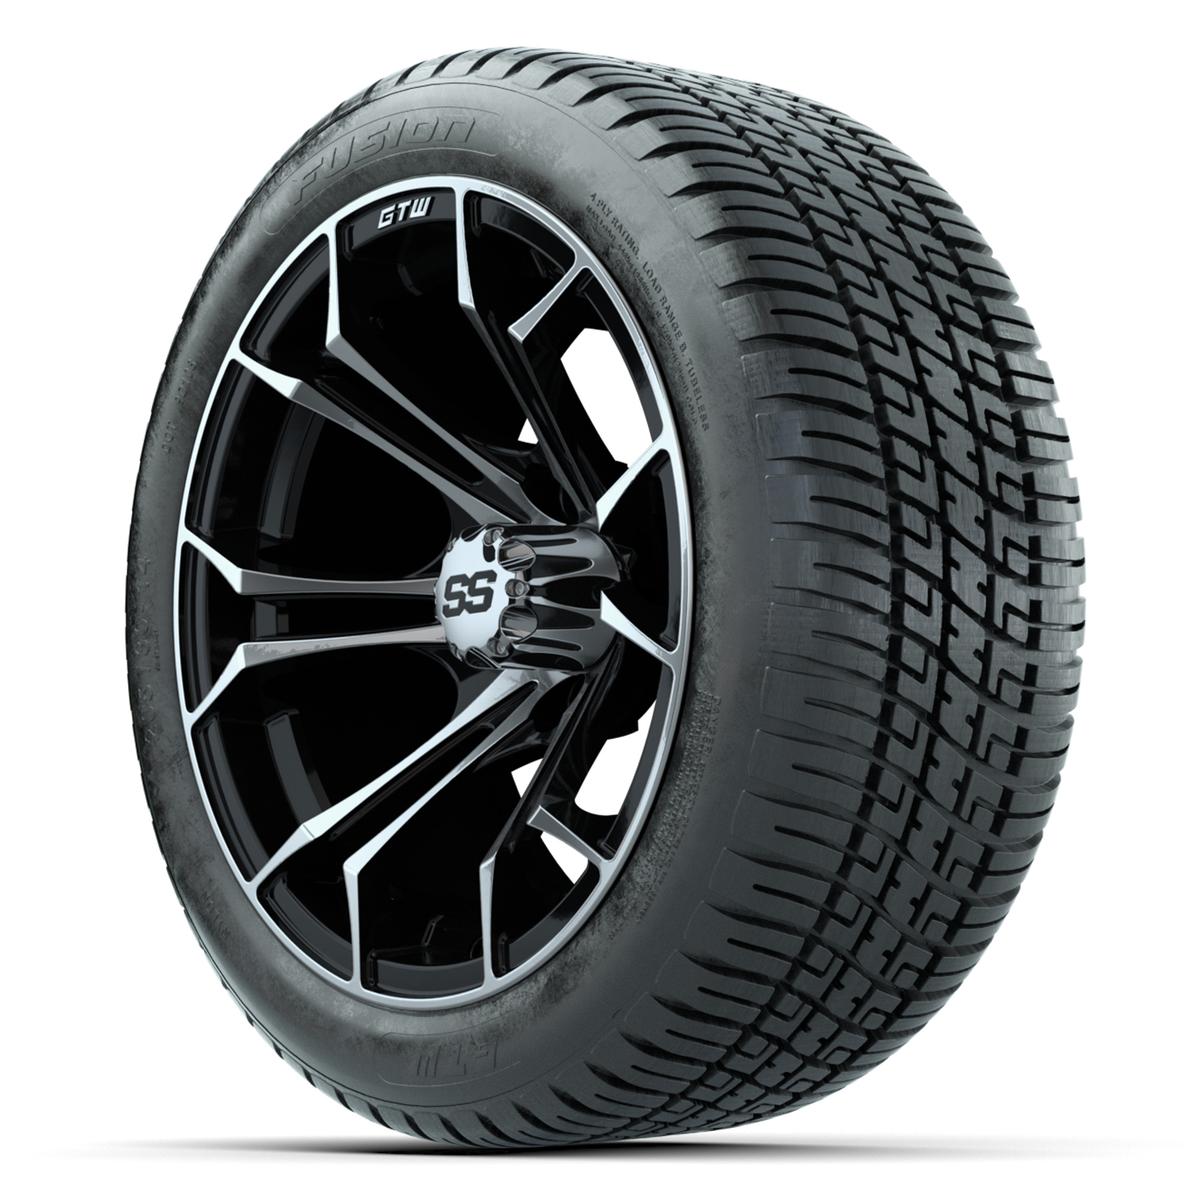 GTW Spyder Machined/Black 14 in Wheels with 205/30-14 Fusion Street Tires – Full Set